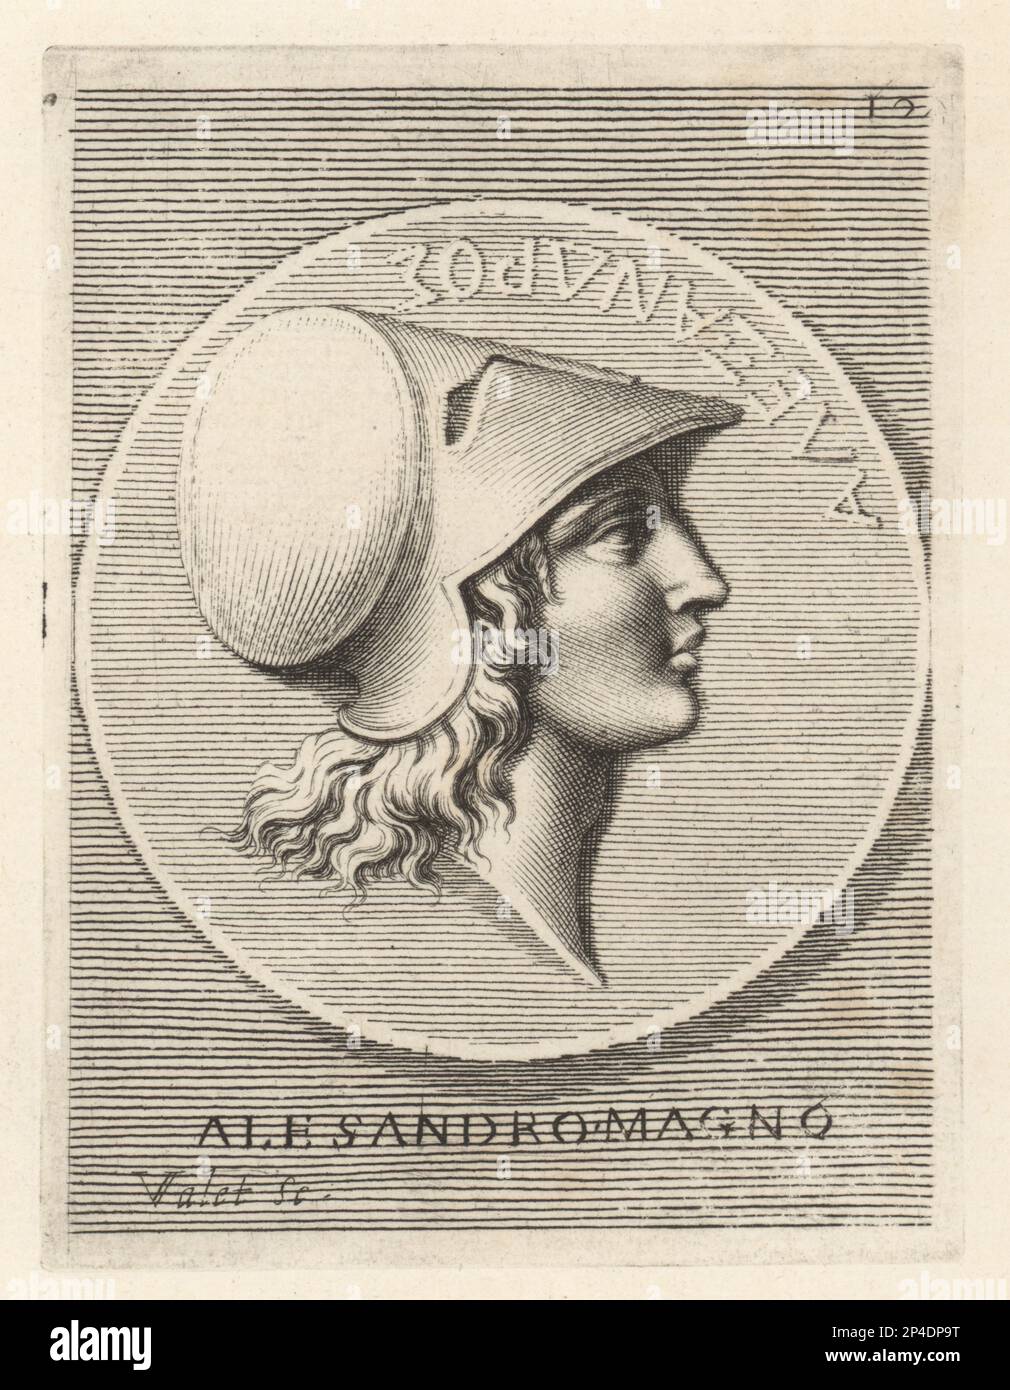 Profile portrait of Alexander the Great, Alexander III of Macedon, 356 – 323 BC, king of the ancient Greek kingdom of Macedon. Wearing a Corinthian helmet without crest or crown. From a silver coin in the collection of Gio. Pietro Bellori. Alessandro Magno. Copperplate engraving by Guillaume Vallet after Giovanni Angelo Canini from Iconografia, cioe disegni d'imagini de famosissimi monarchi, regi, filososi, poeti ed oratori dell' Antichita, Drawings of images of famous monarchs, kings, philosophers, poets and orators of Antiquity, Ignatio de’Lazari, Rome, 1699. Stock Photo